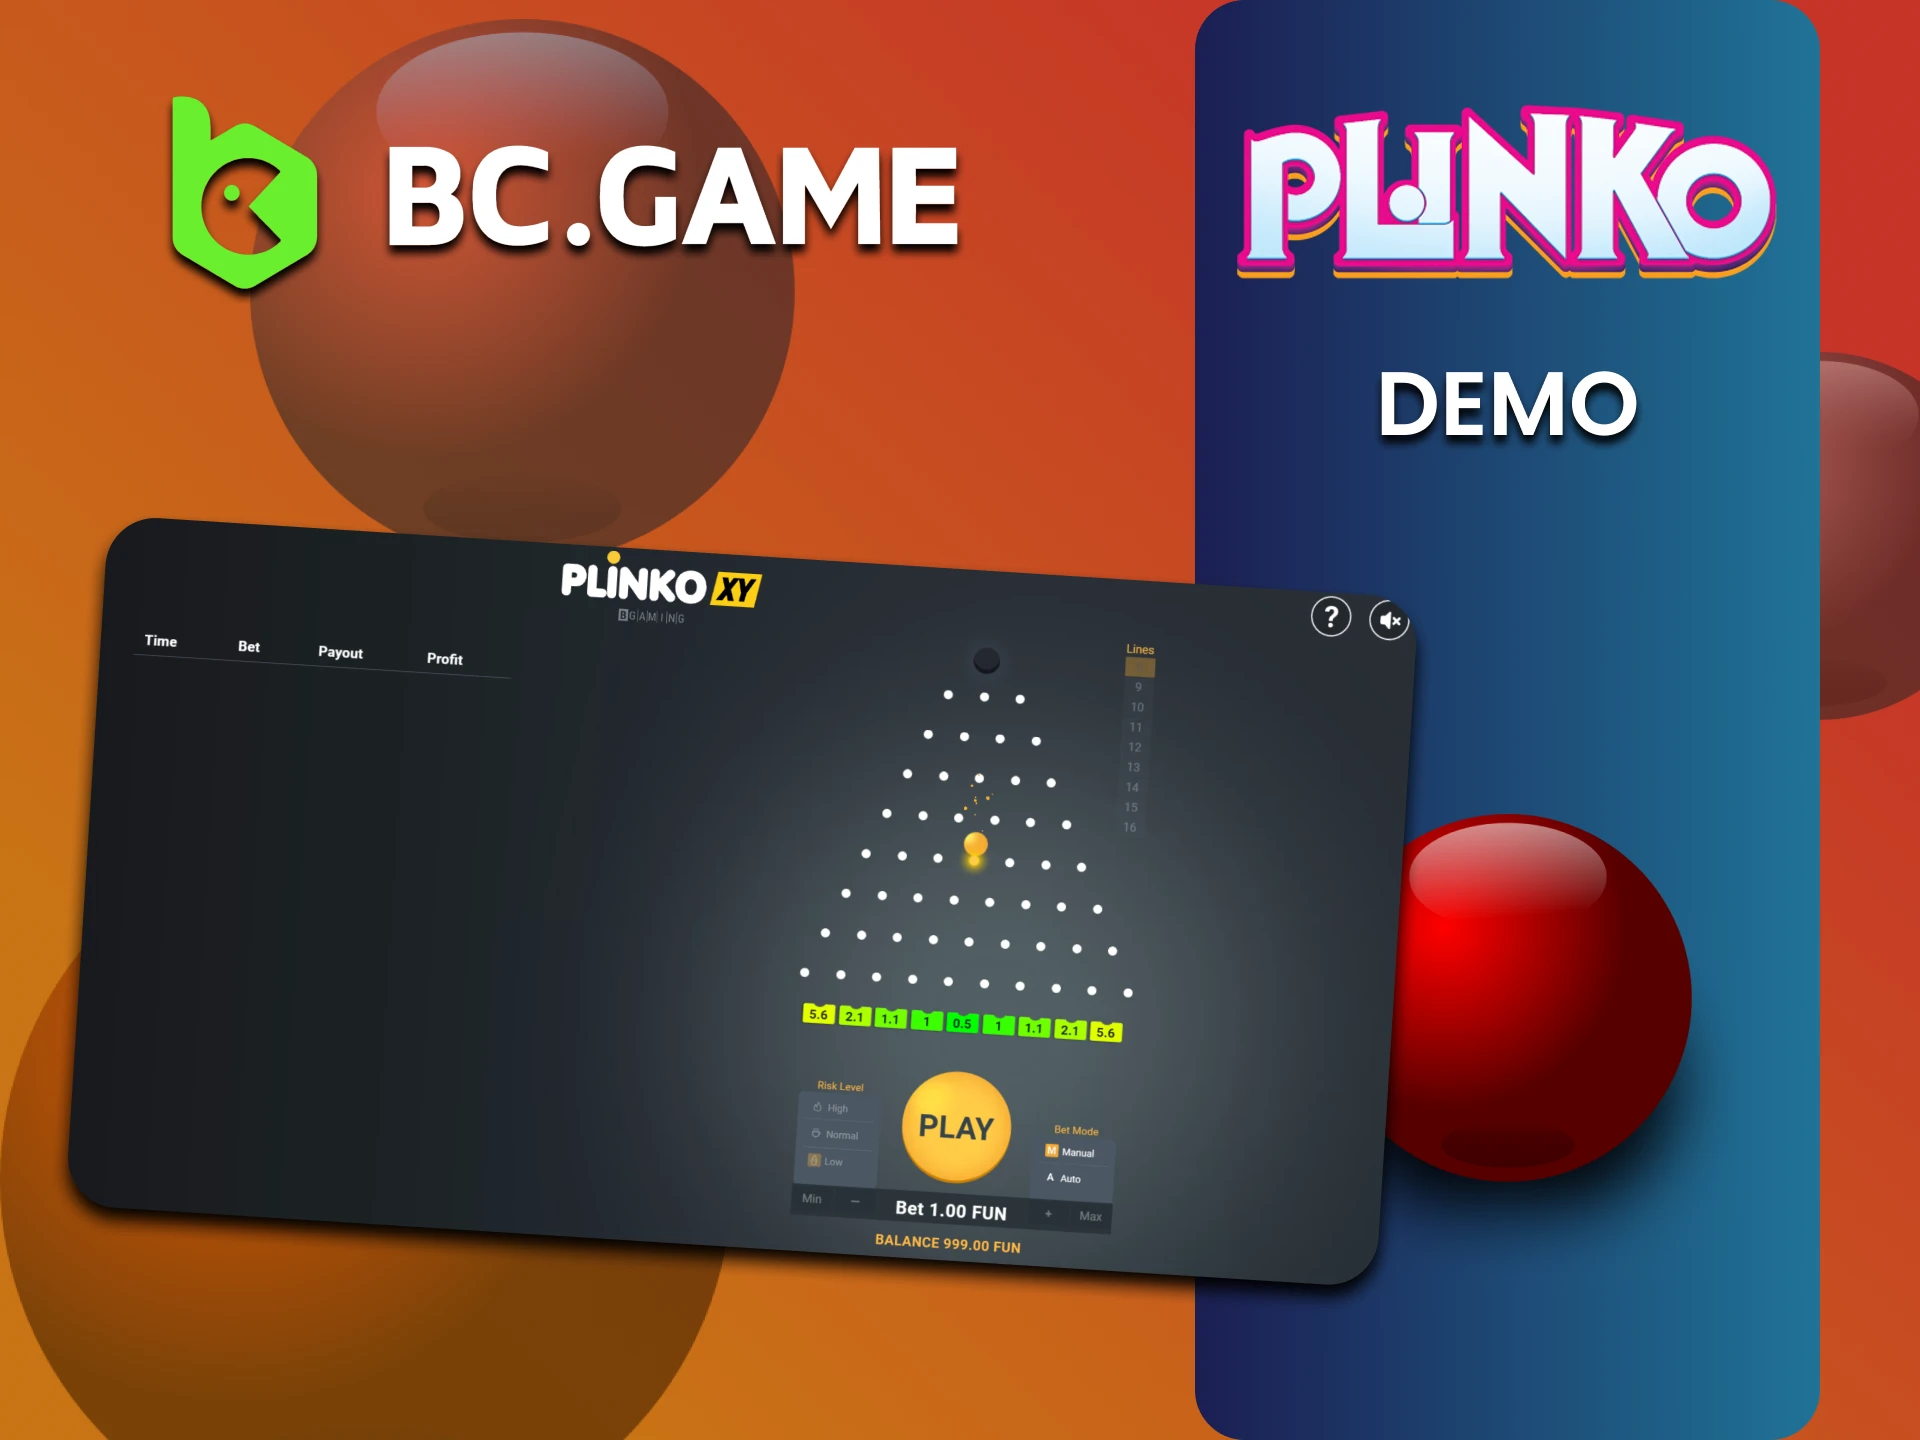 For training, BCGame has a demo version of Plinko.